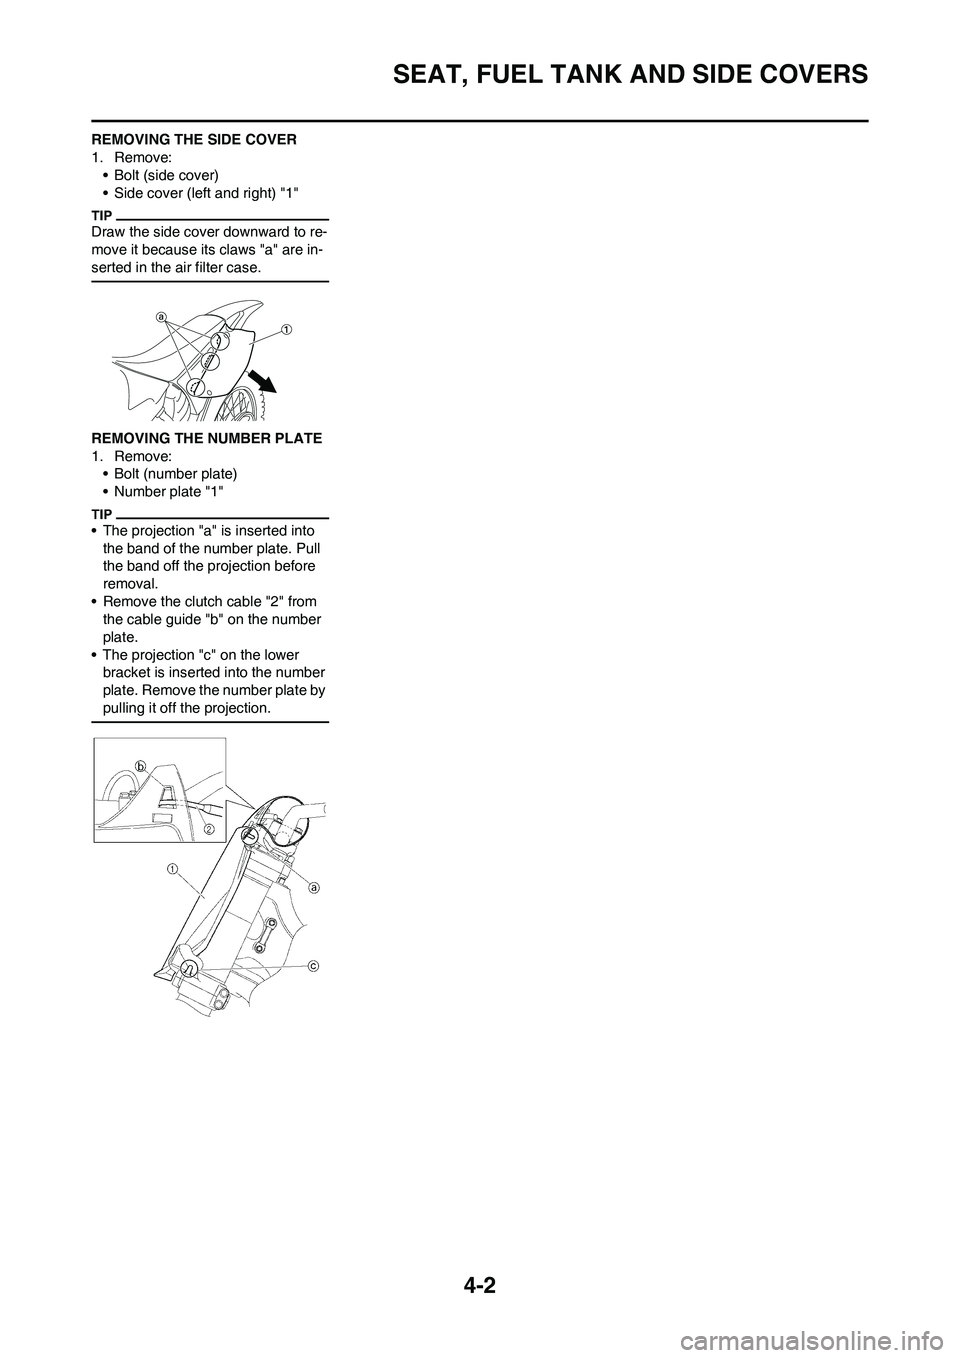 YAMAHA YZ125LC 2010  Owners Manual 4-2
SEAT, FUEL TANK AND SIDE COVERS
REMOVING THE SIDE COVER
1. Remove:
• Bolt (side cover)
• Side cover (left and right) "1"
Draw the side cover downward to re-
move it because its claws "a" are i